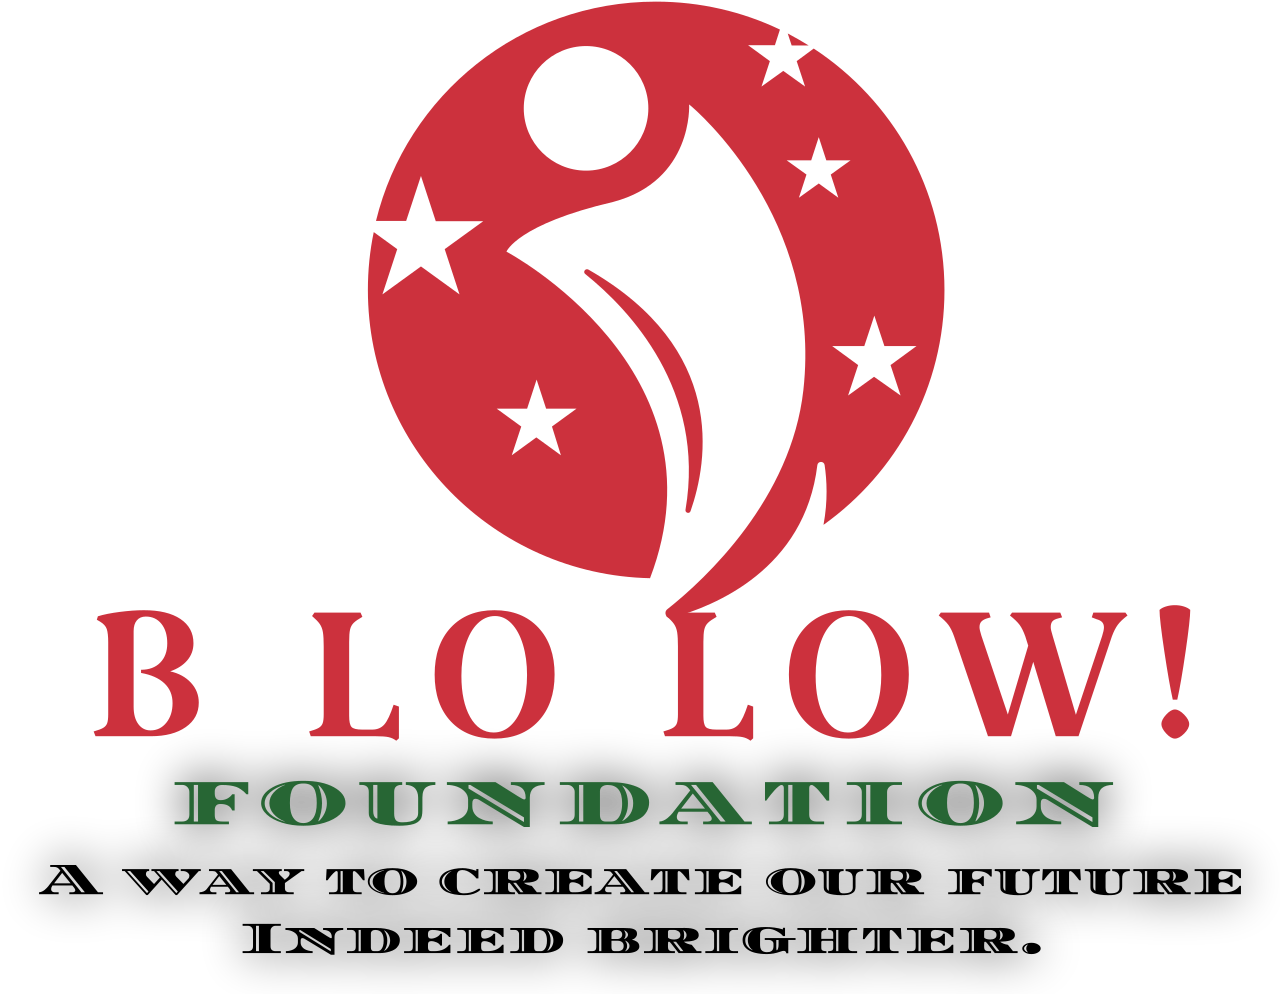 B Lo Low!'s web page